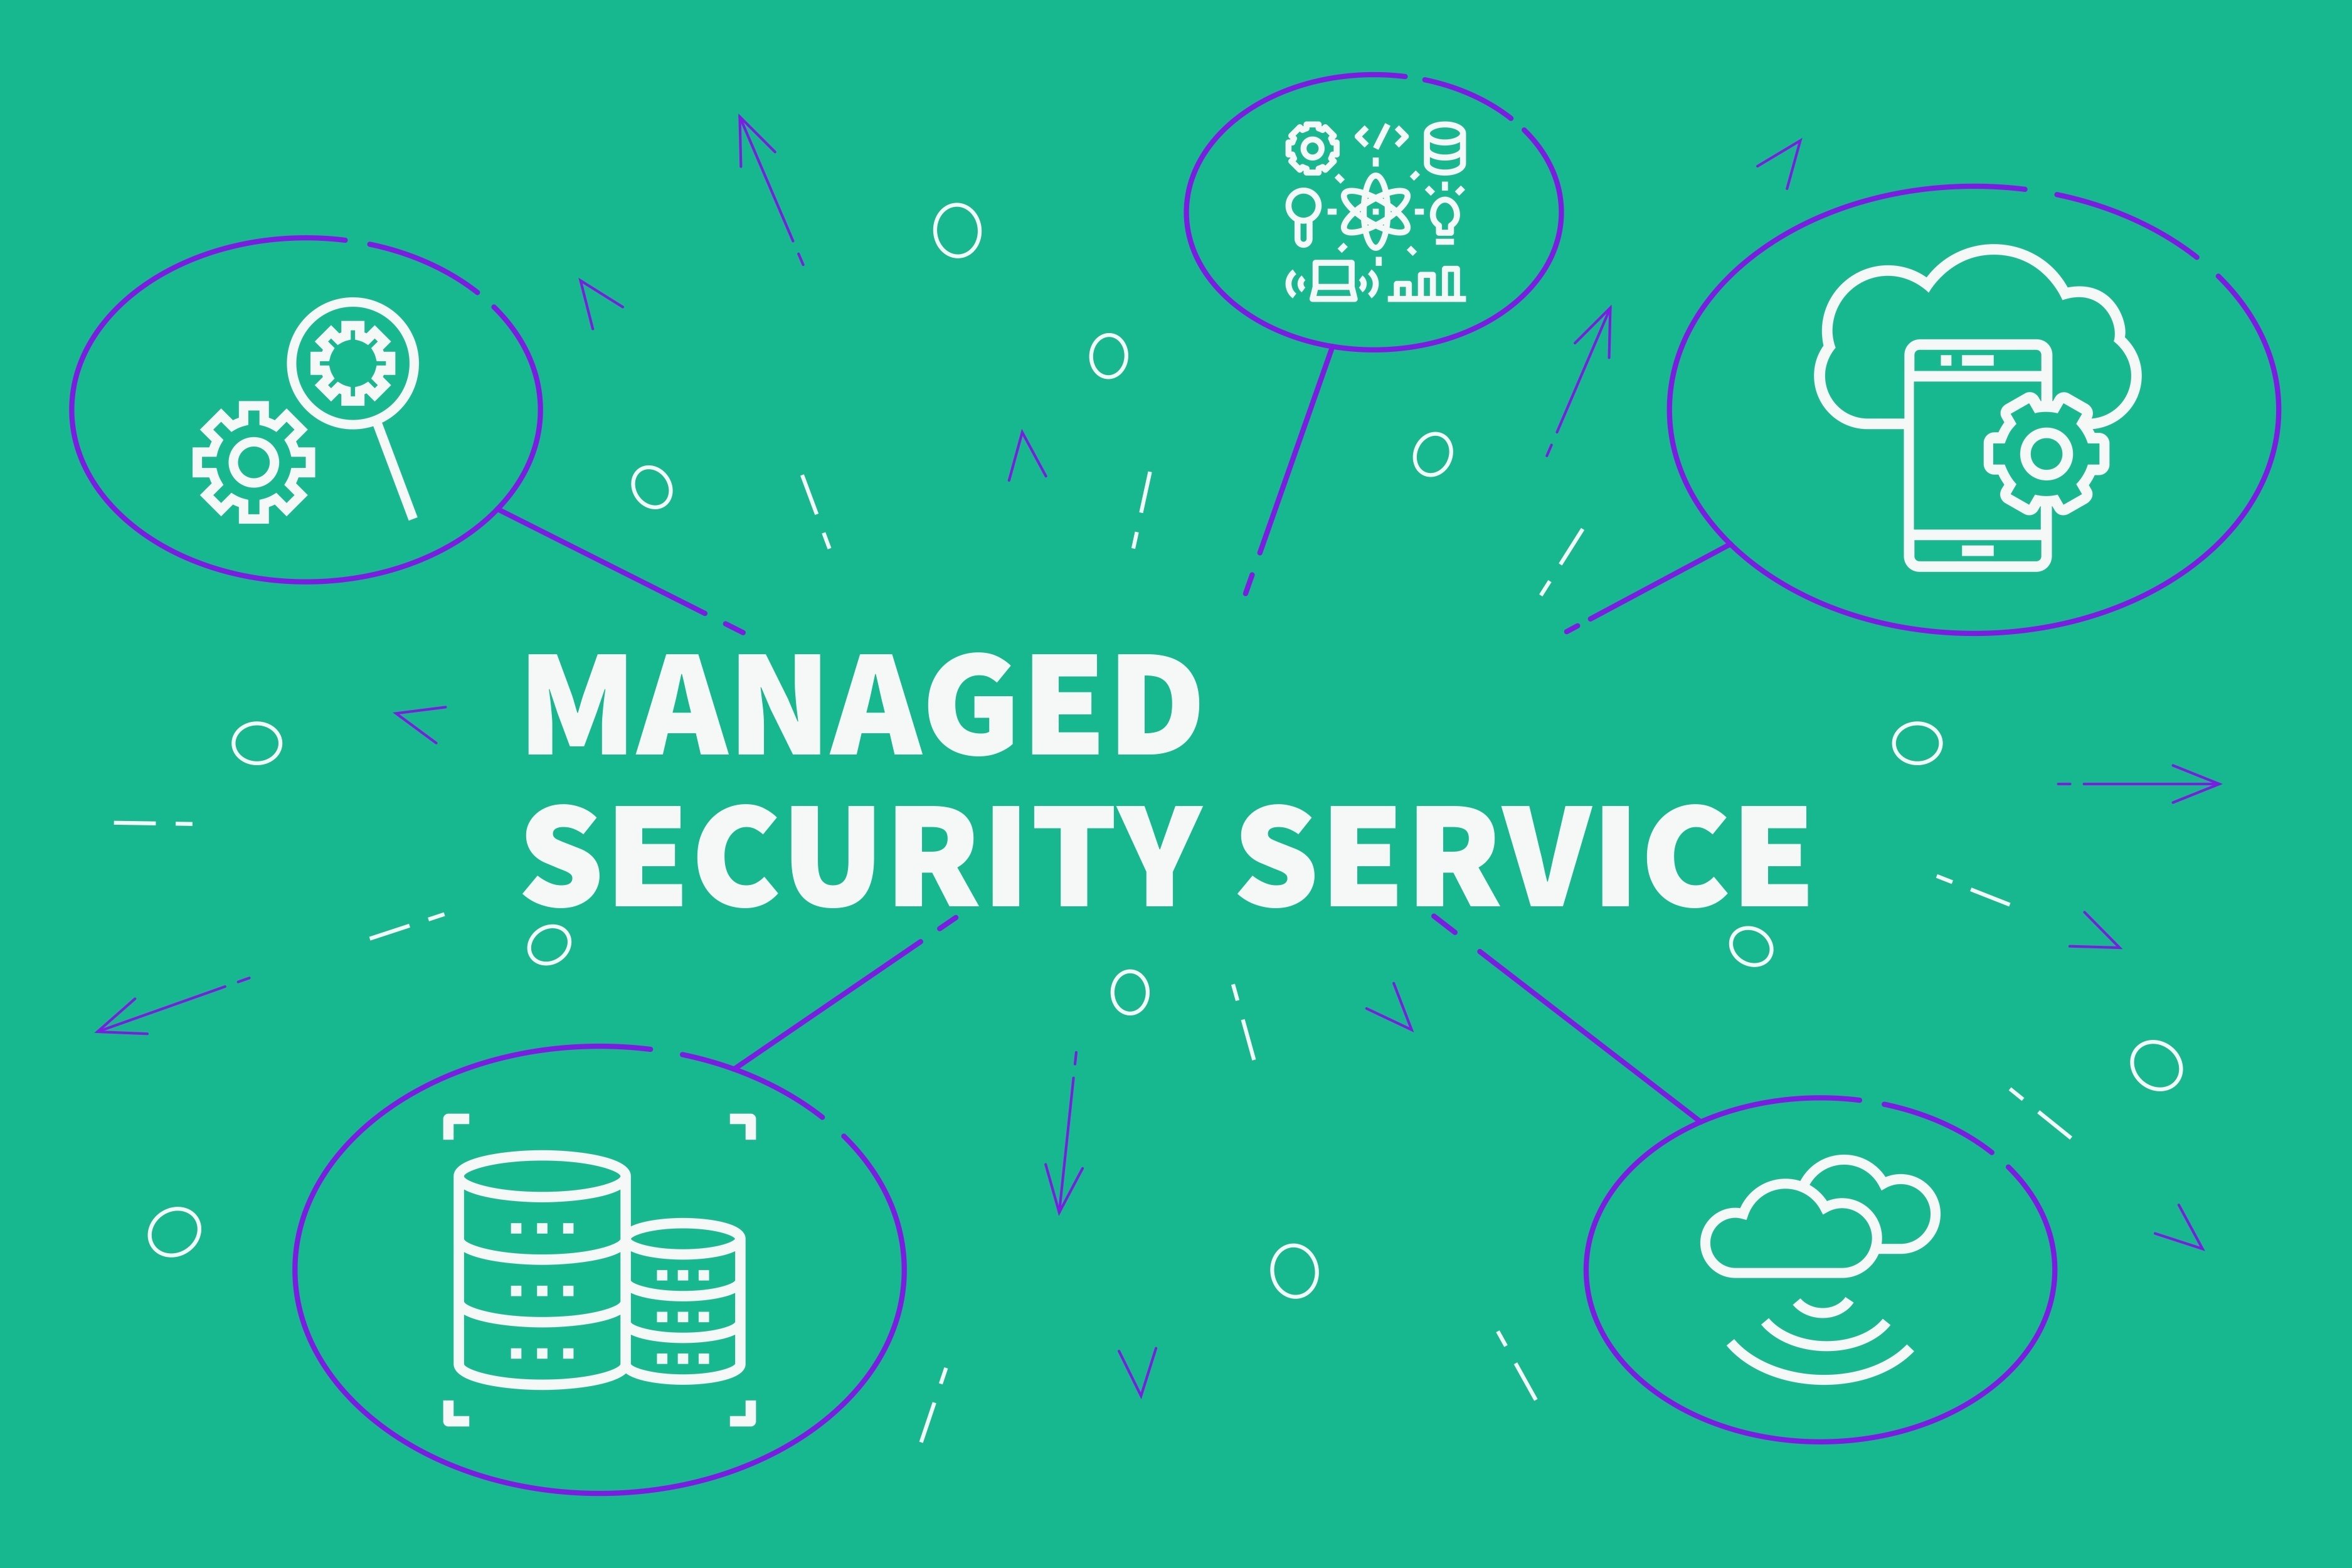 Managed security service